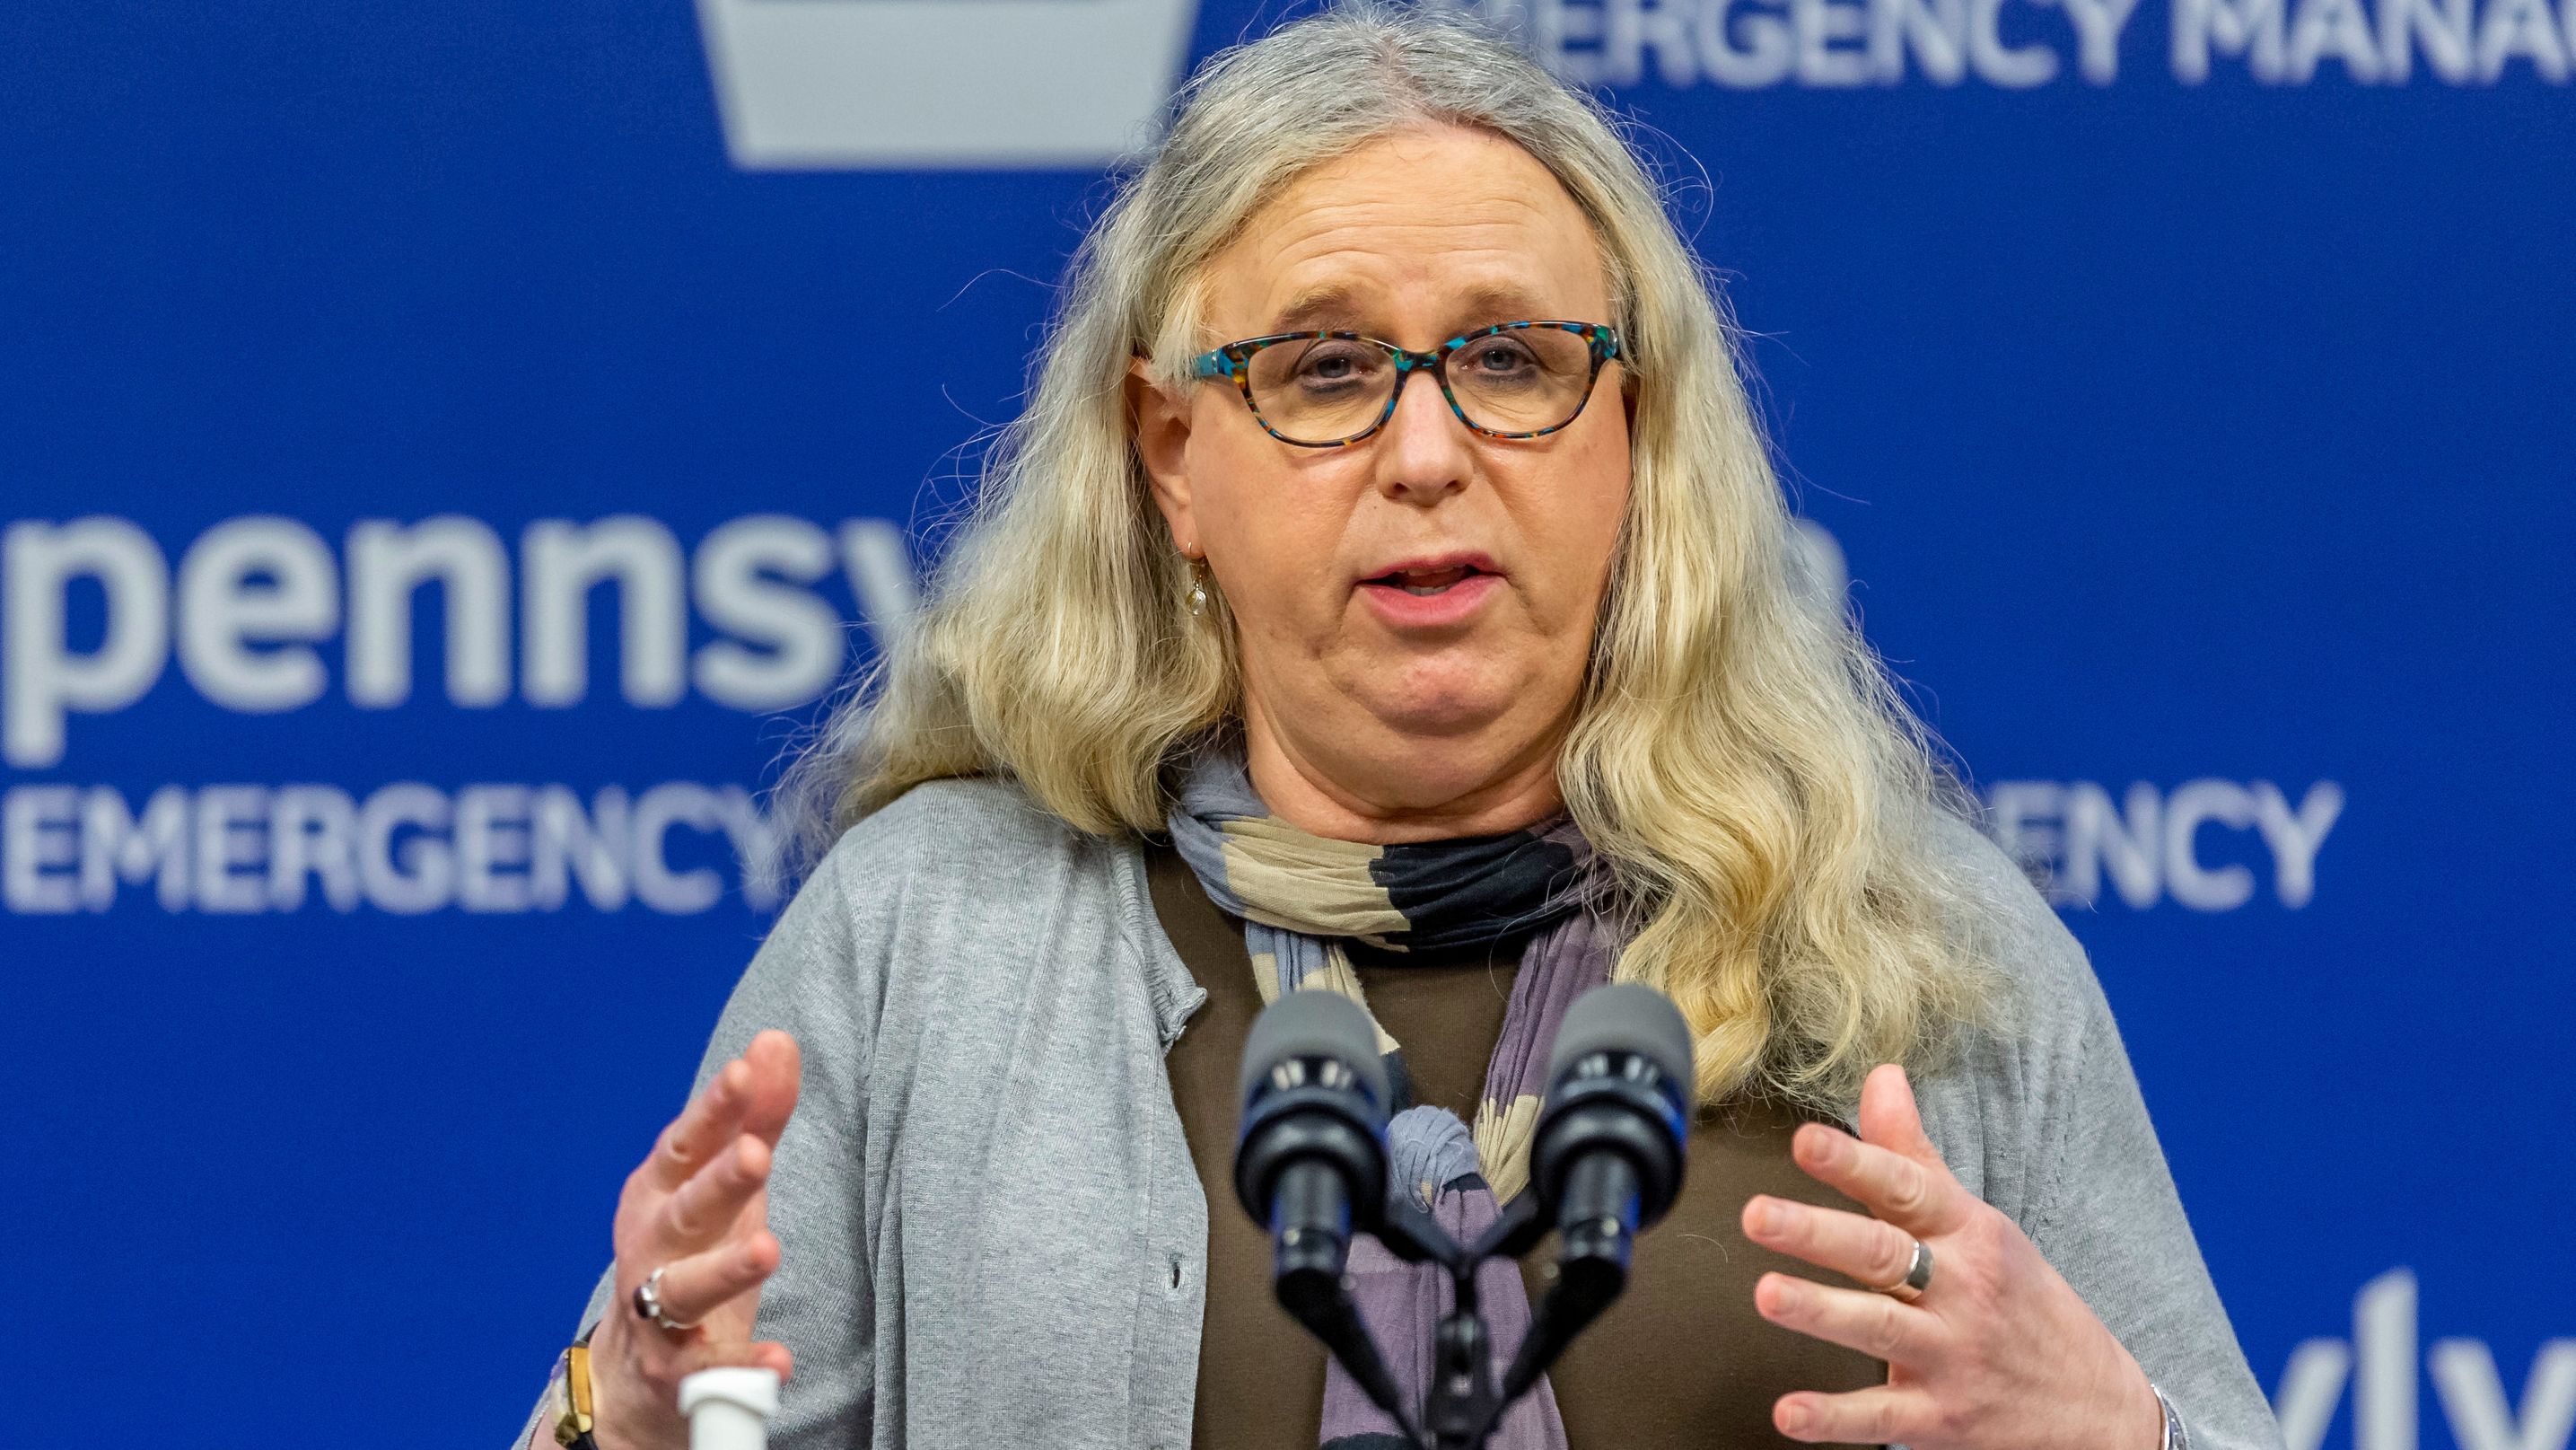 In this May 29, 2020, file photo, Pennsylvania Secretary of Health Dr. Rachel Levine meets with the media at the Pennsylvania Emergency Management Agency (PEMA) headquarters in Harrisburg, Pa. President-elect Joe Biden has tapped Levine to be his assistant secretary of health, leaving her poised to become the first transgender federal official to be confirmed by the U.S. Senate. 